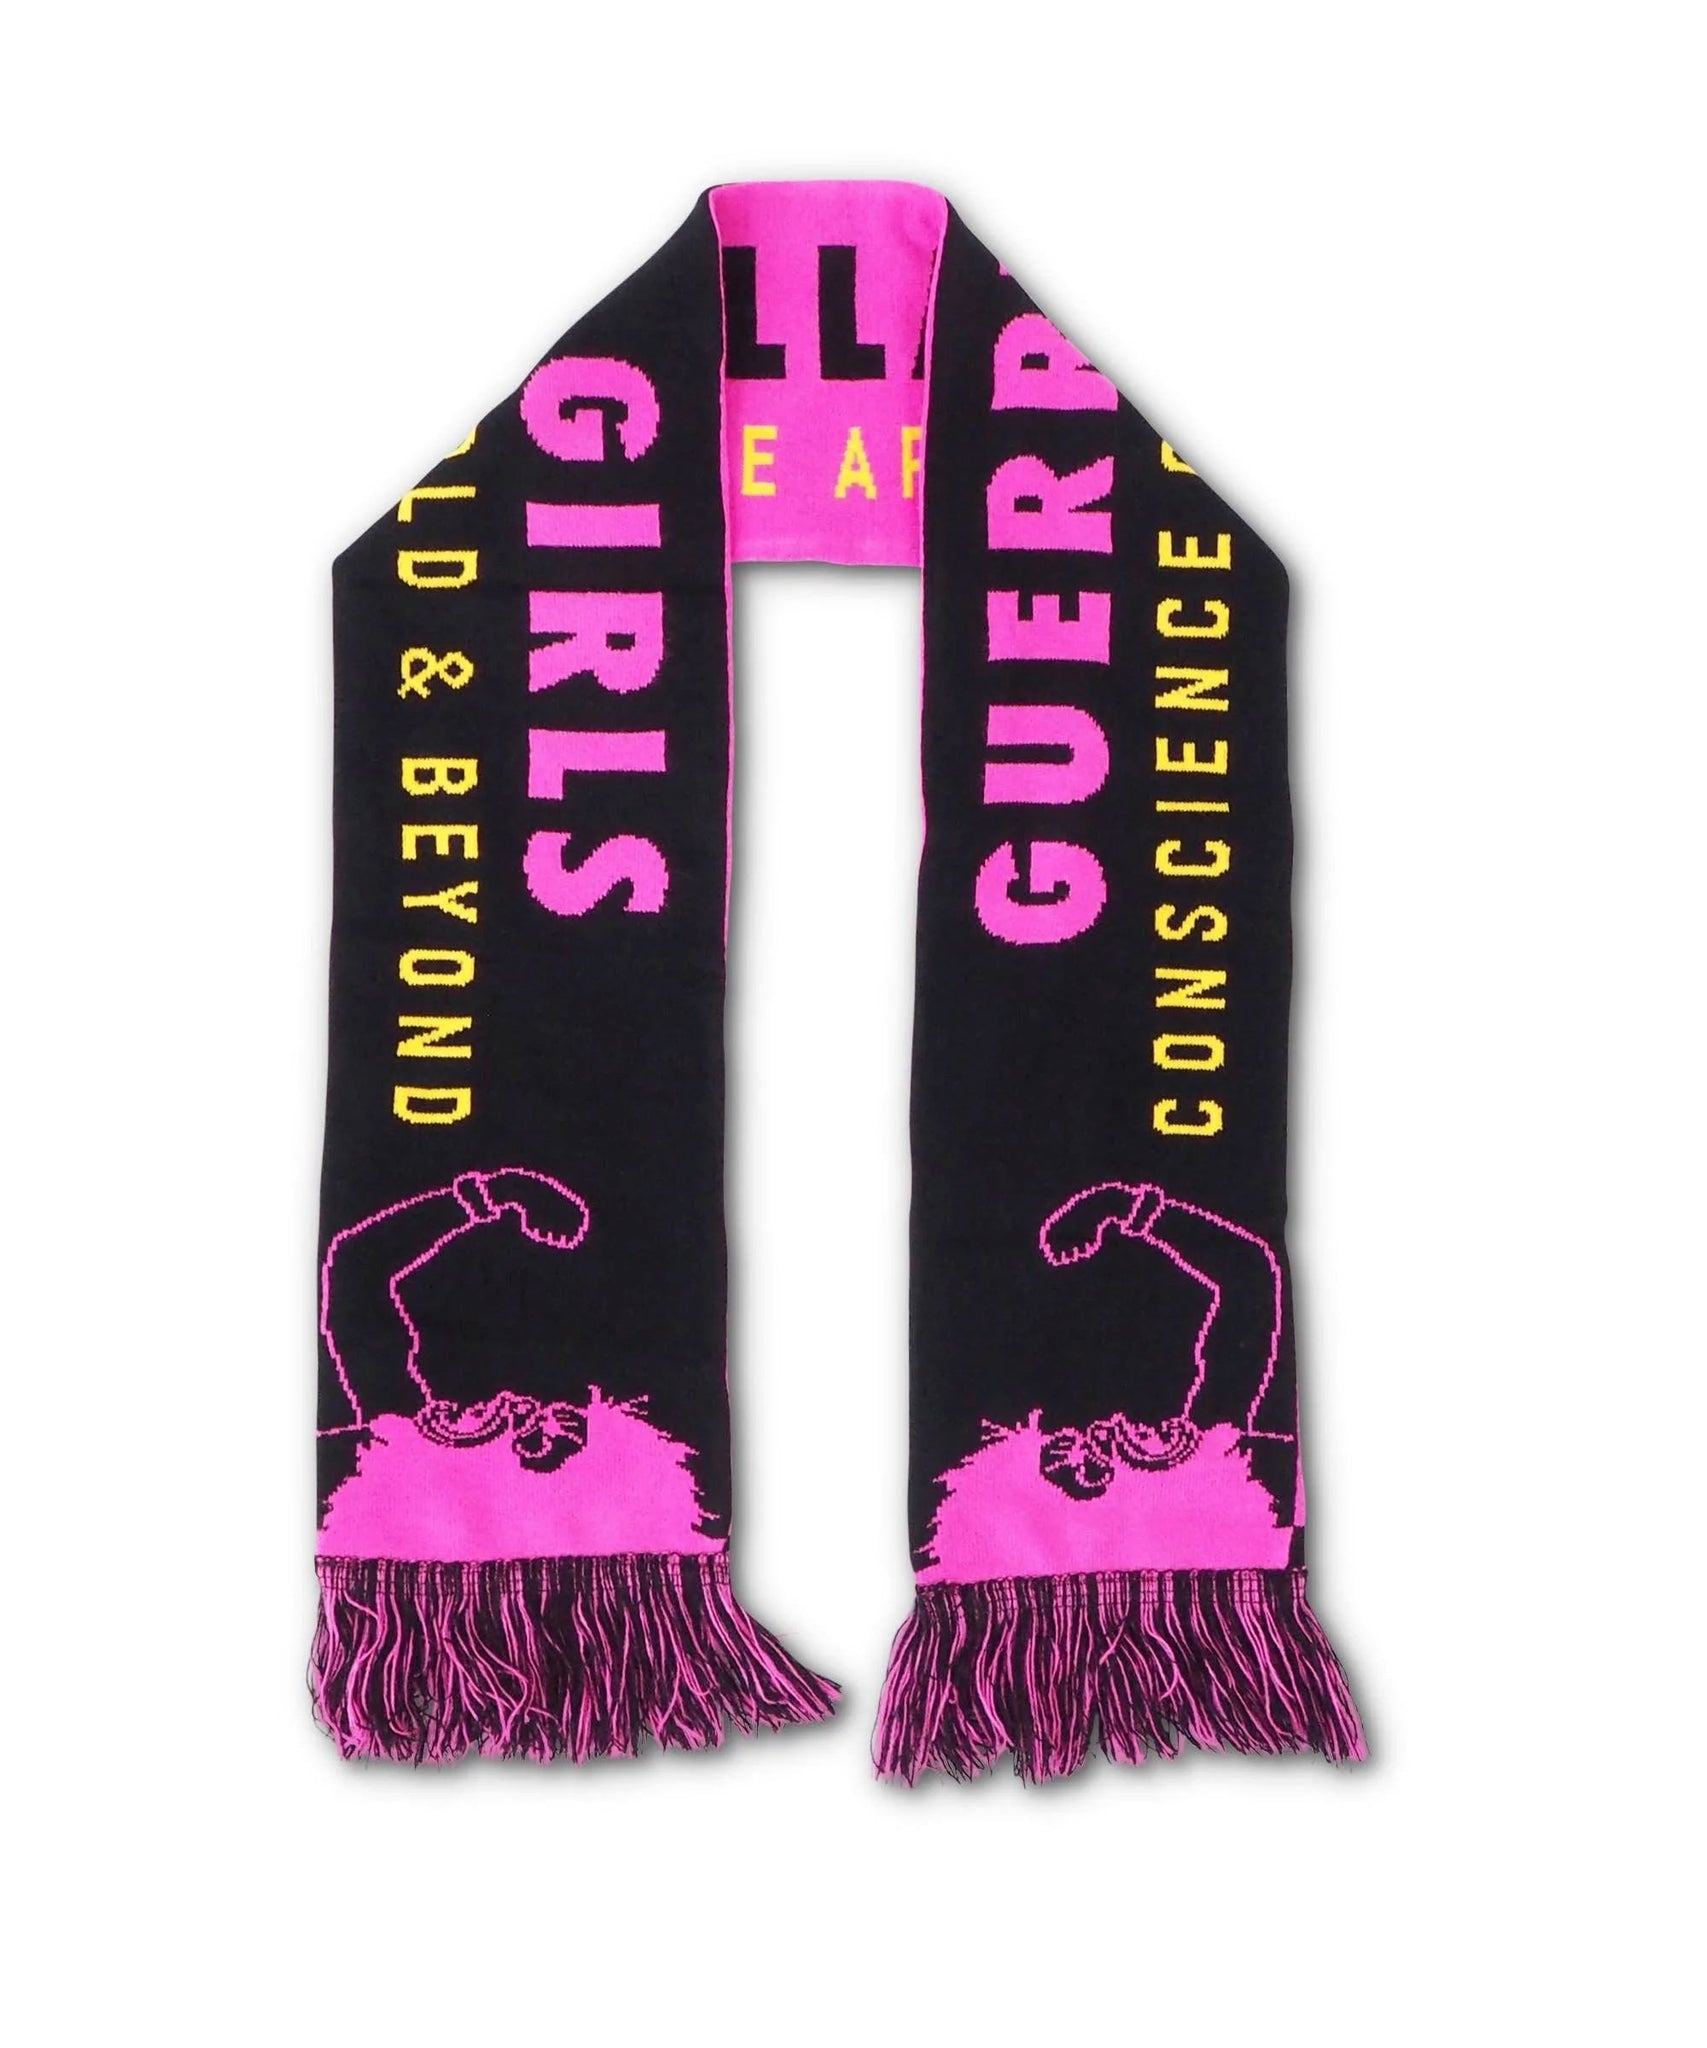 Conscience of the Art World Scarf x Guerrilla Girls - Third Drawer Down